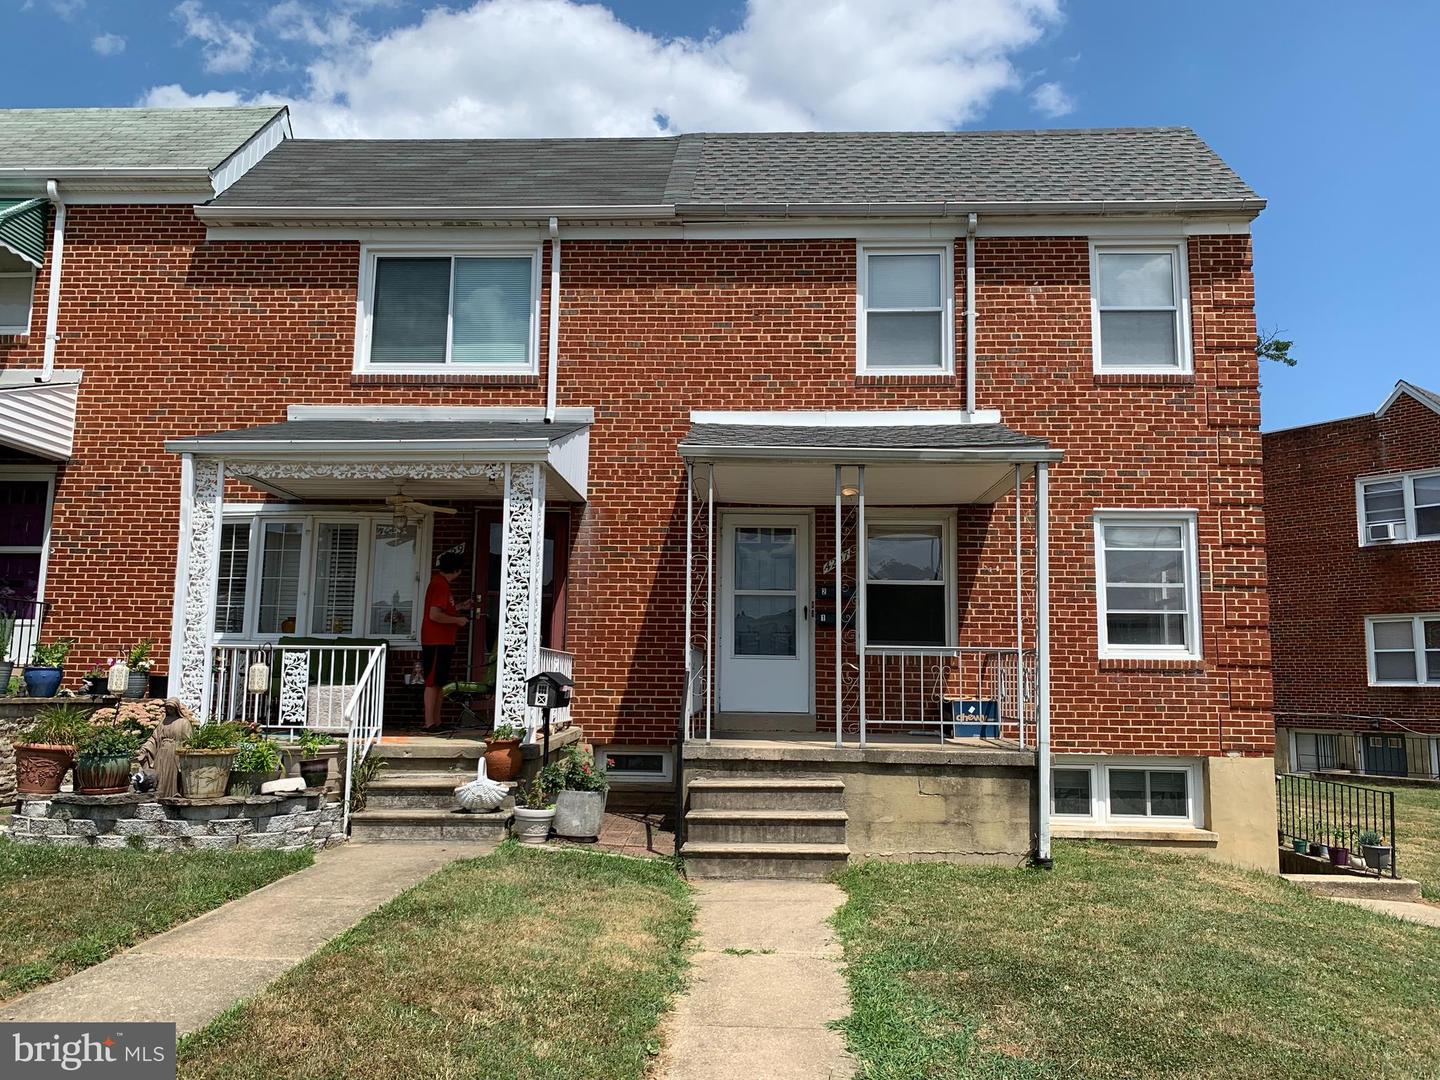 View Baltimore, MD 21211 townhome